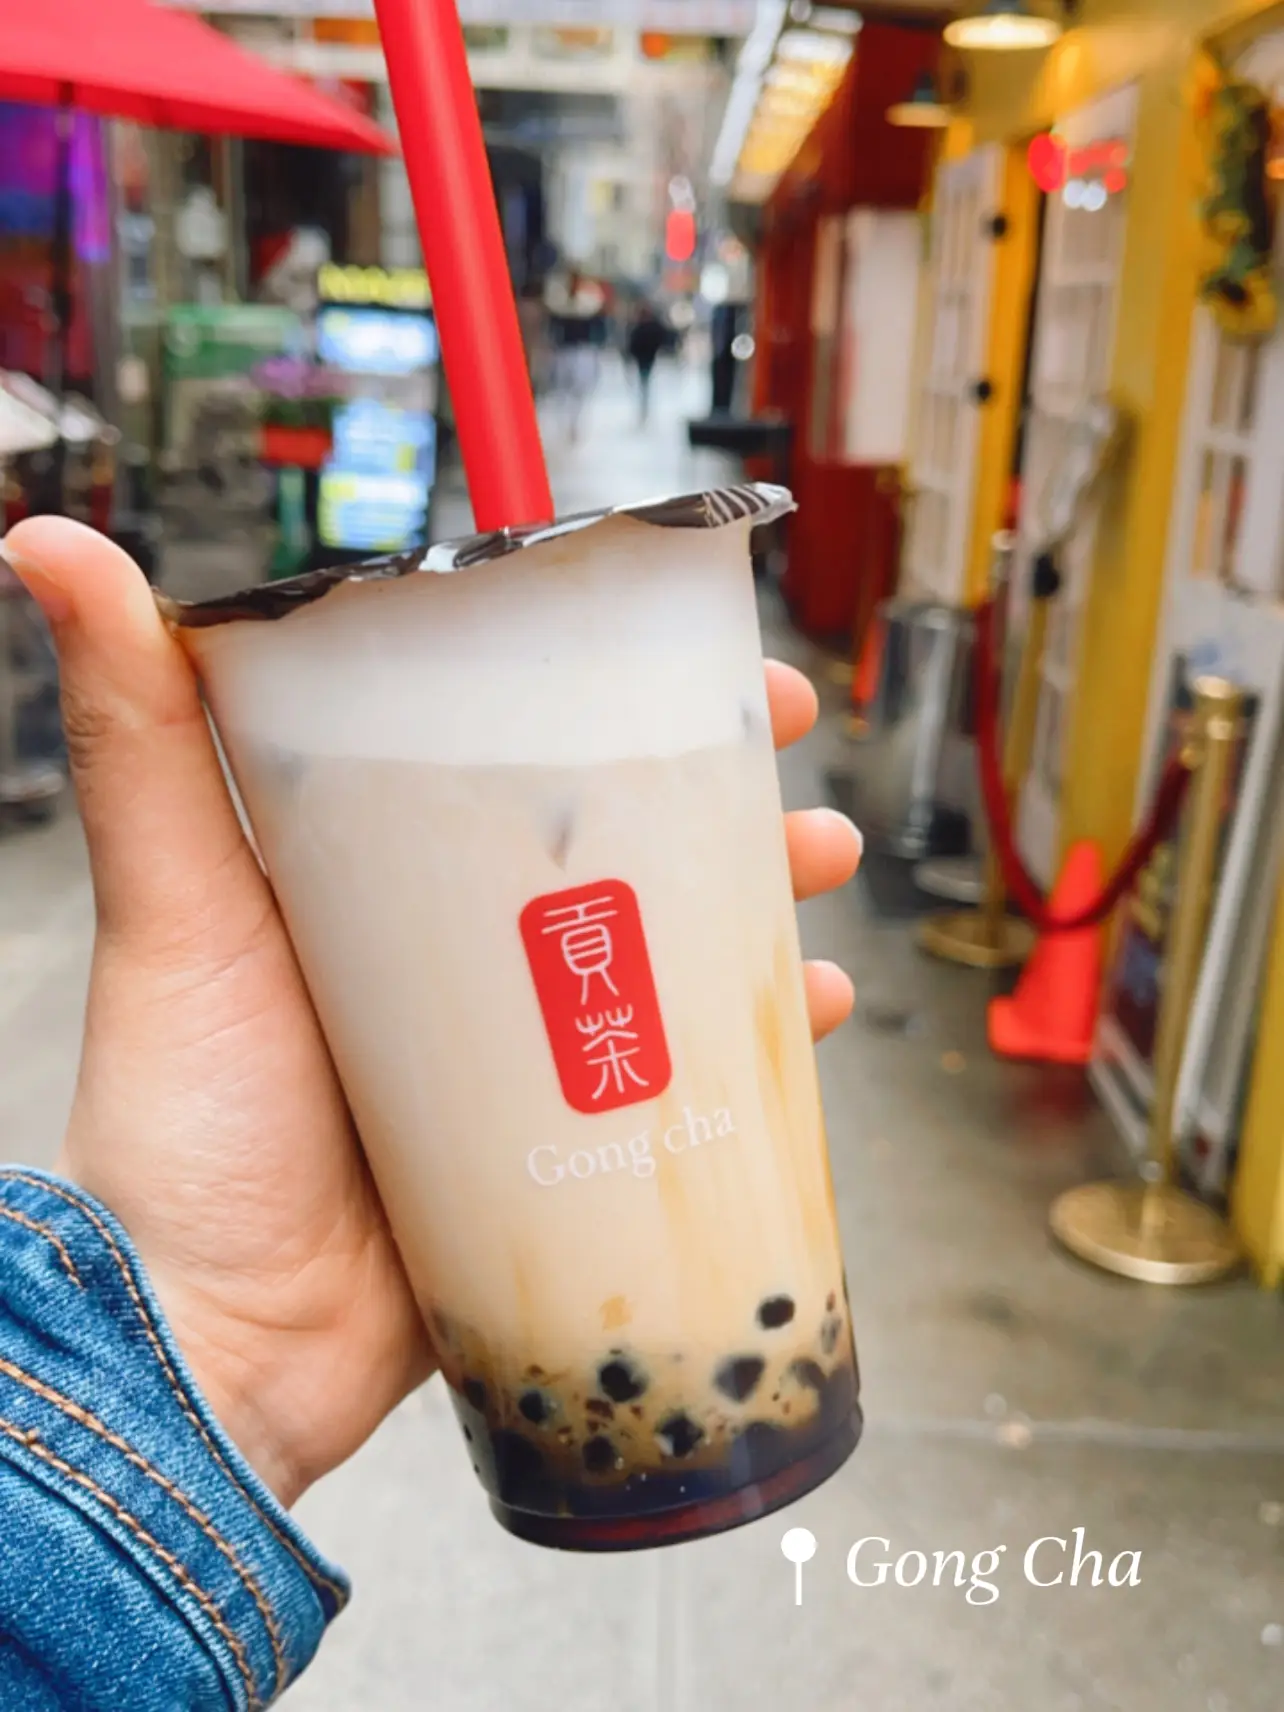  A person is holding a Gong Cha cup.